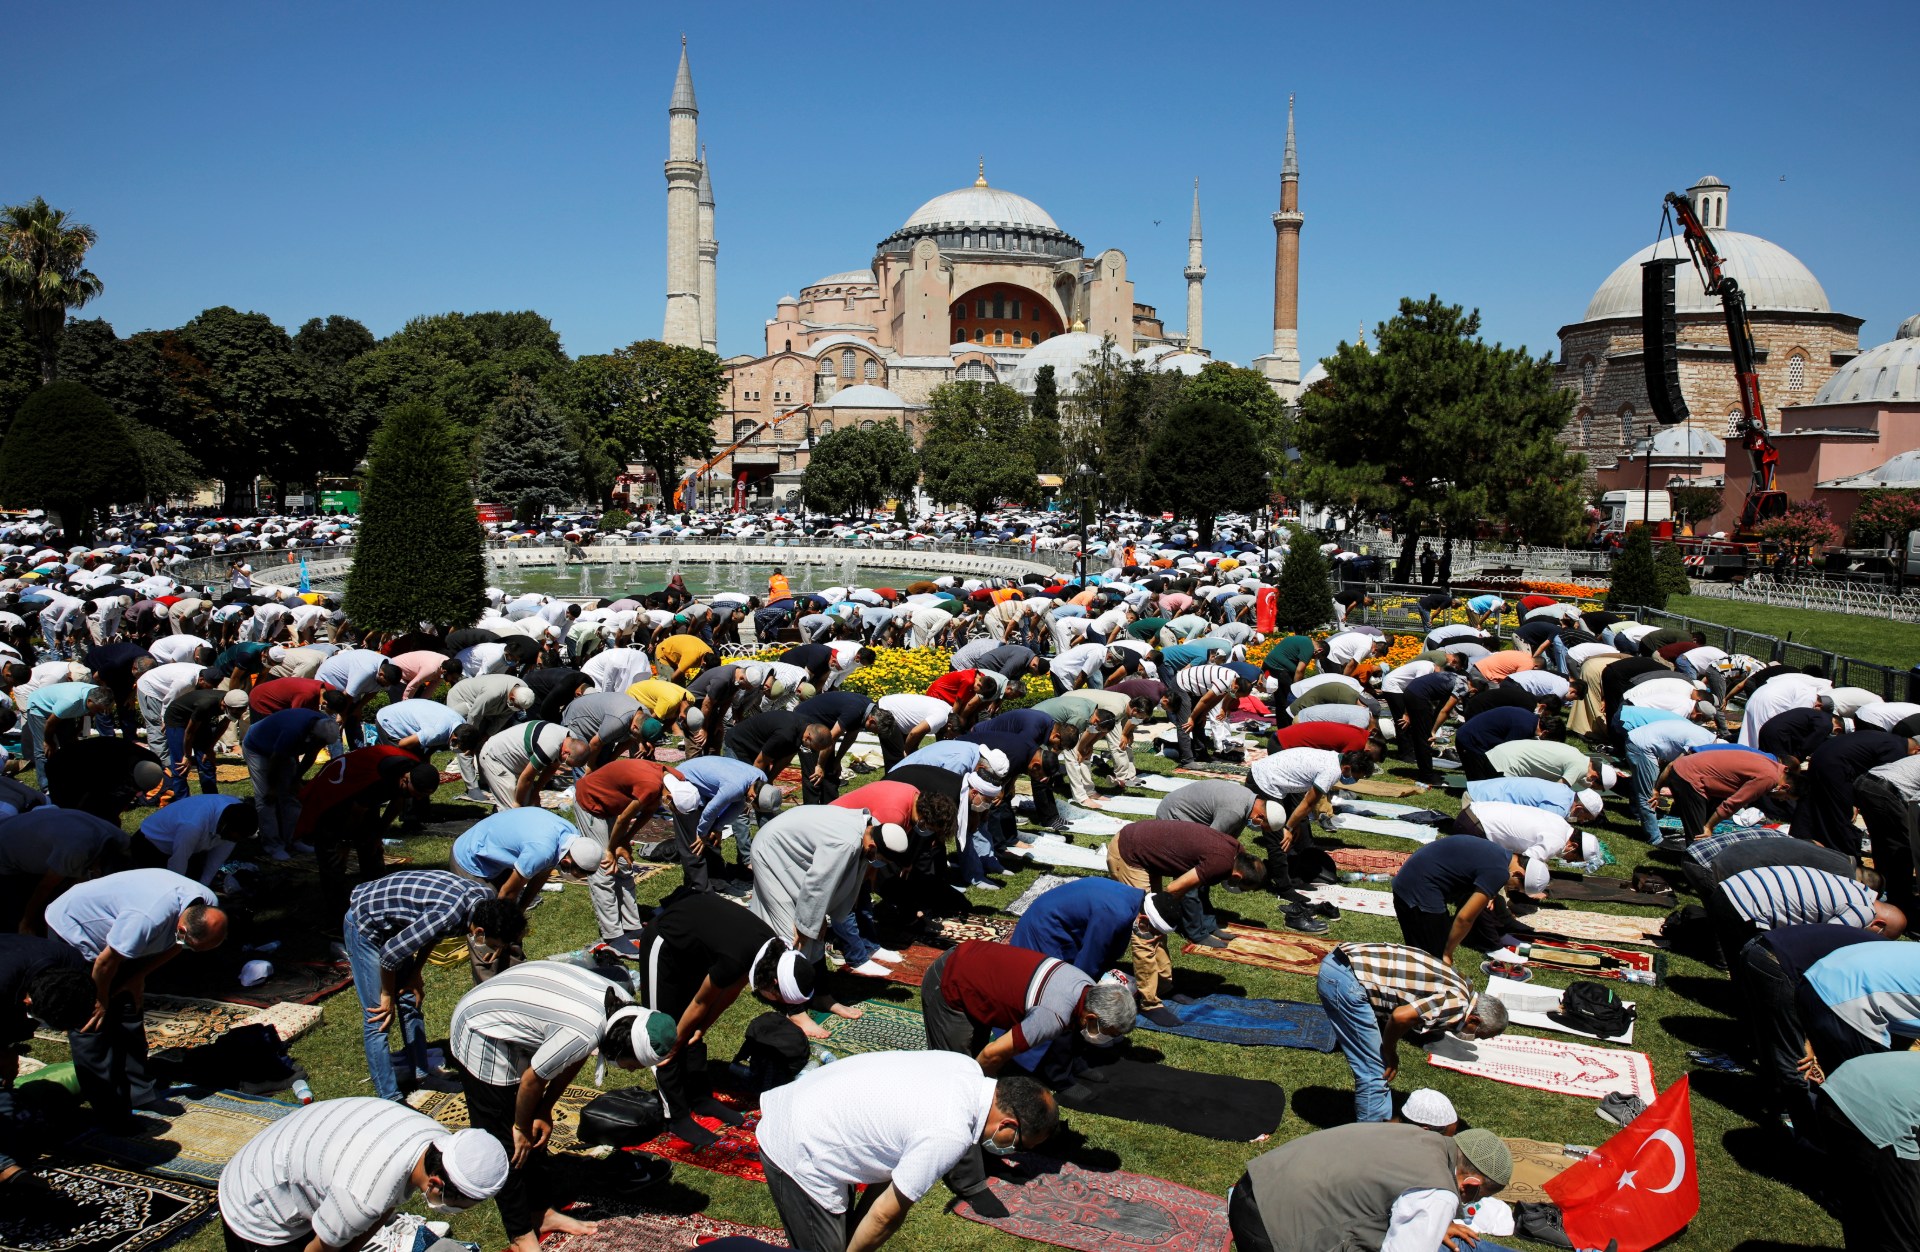 Hagia Sophia: Istanbul revels in 'reconquest' during first Friday ...